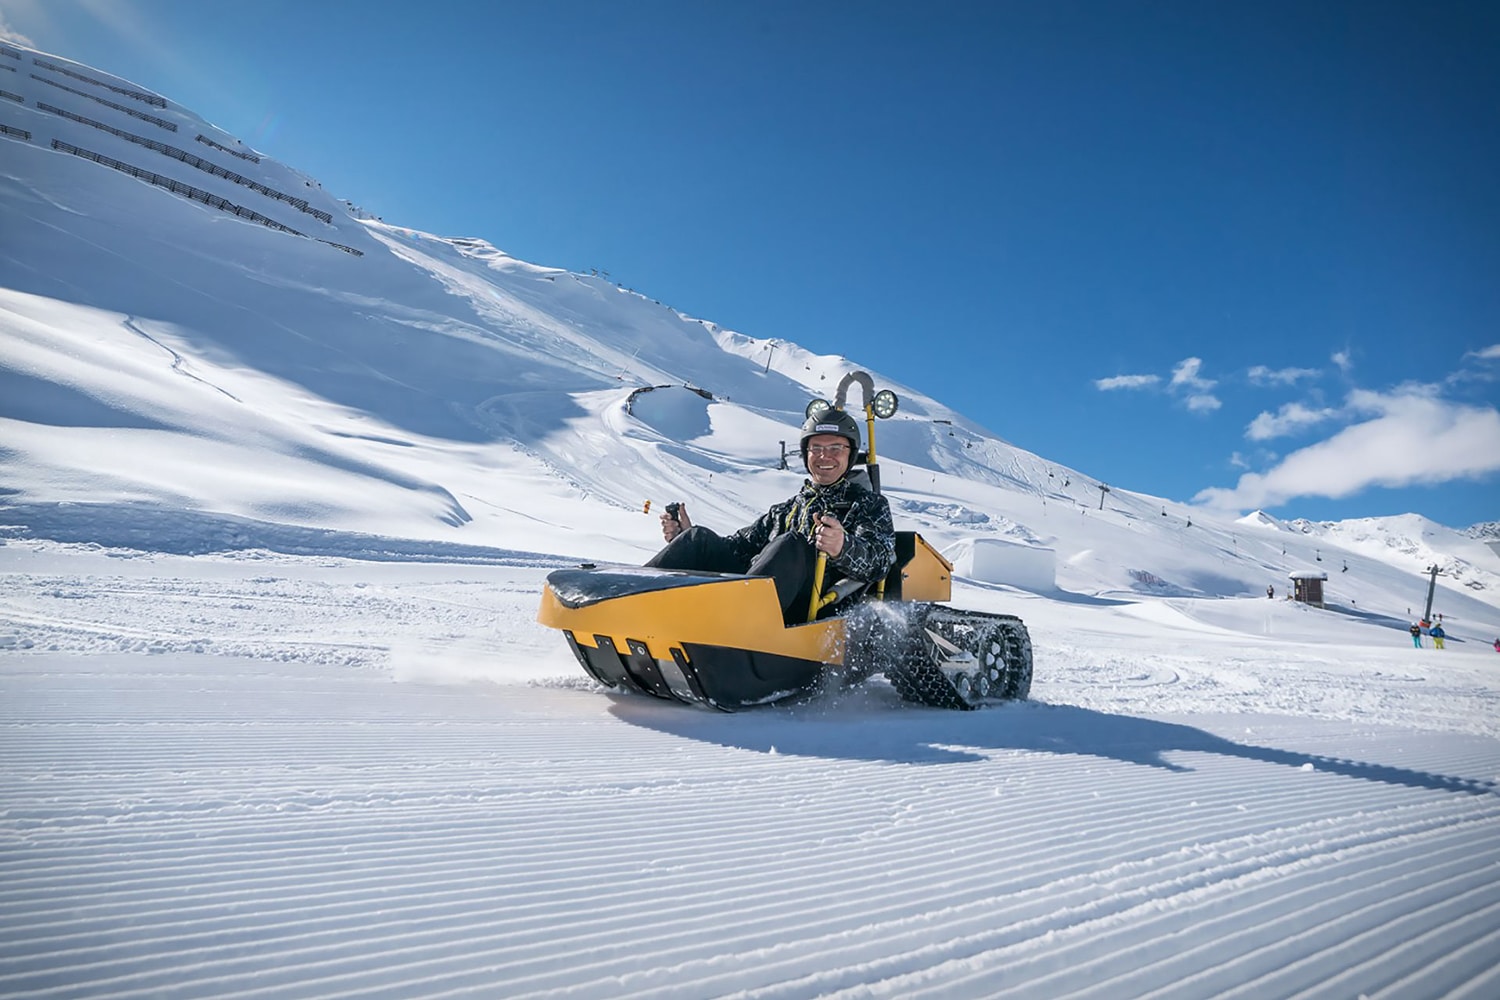 Bobsla, the amazing electric tracked snow kart. Credit: Bobsla